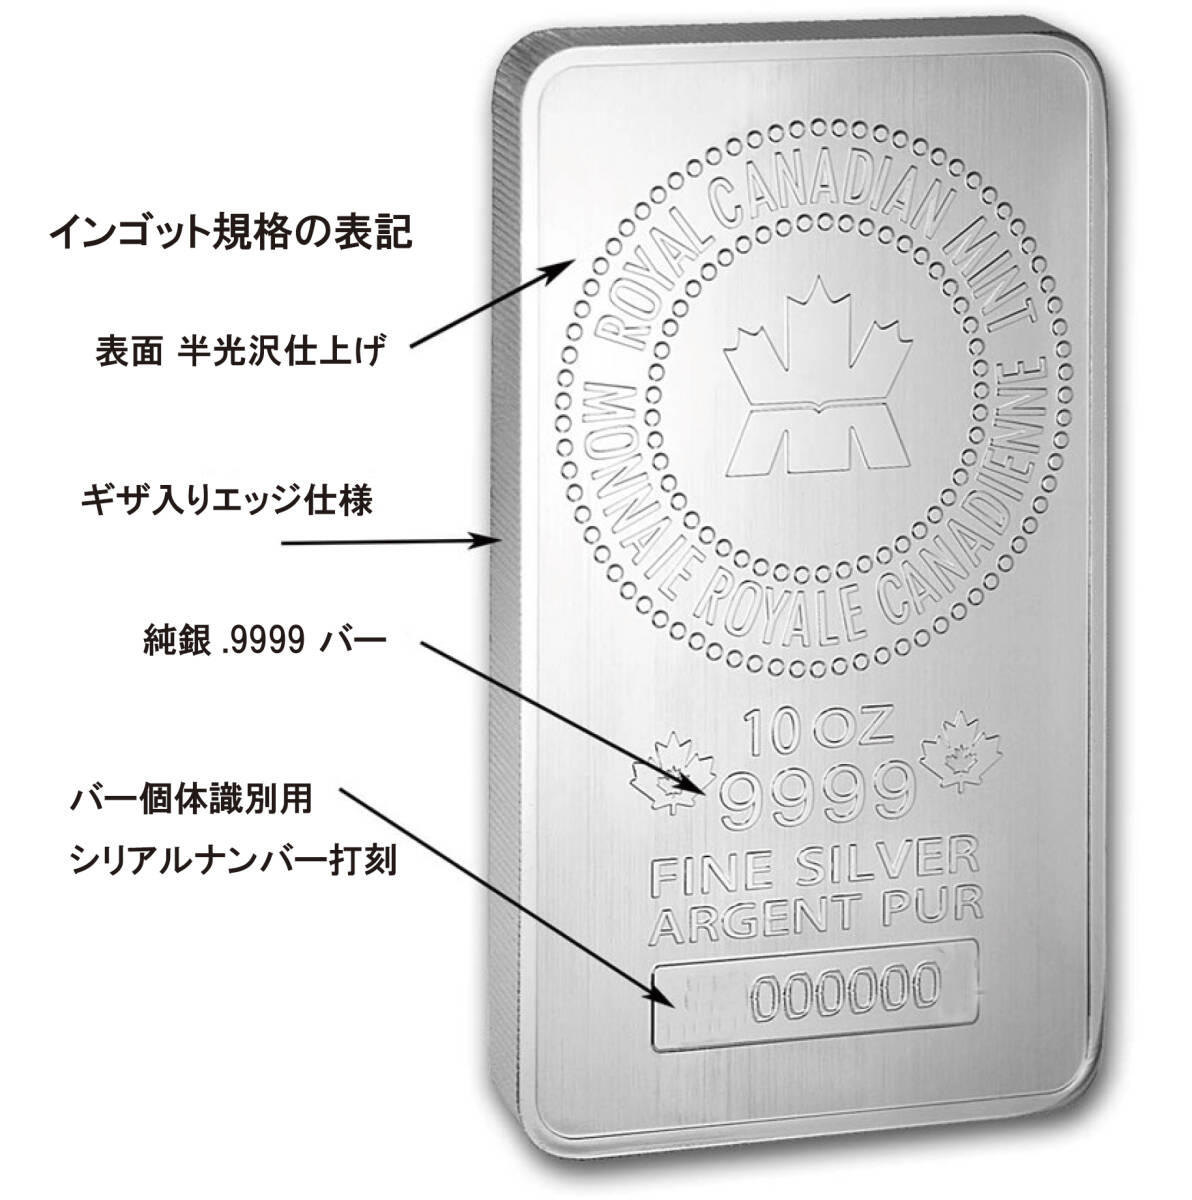 [ property guarantee all. standard!!].. Canada structure . department ..* original silver 10 ounce * in goto* beautiful maple pattern * individual number engrave * original silver.9999*311.0g* pack .. goods!!